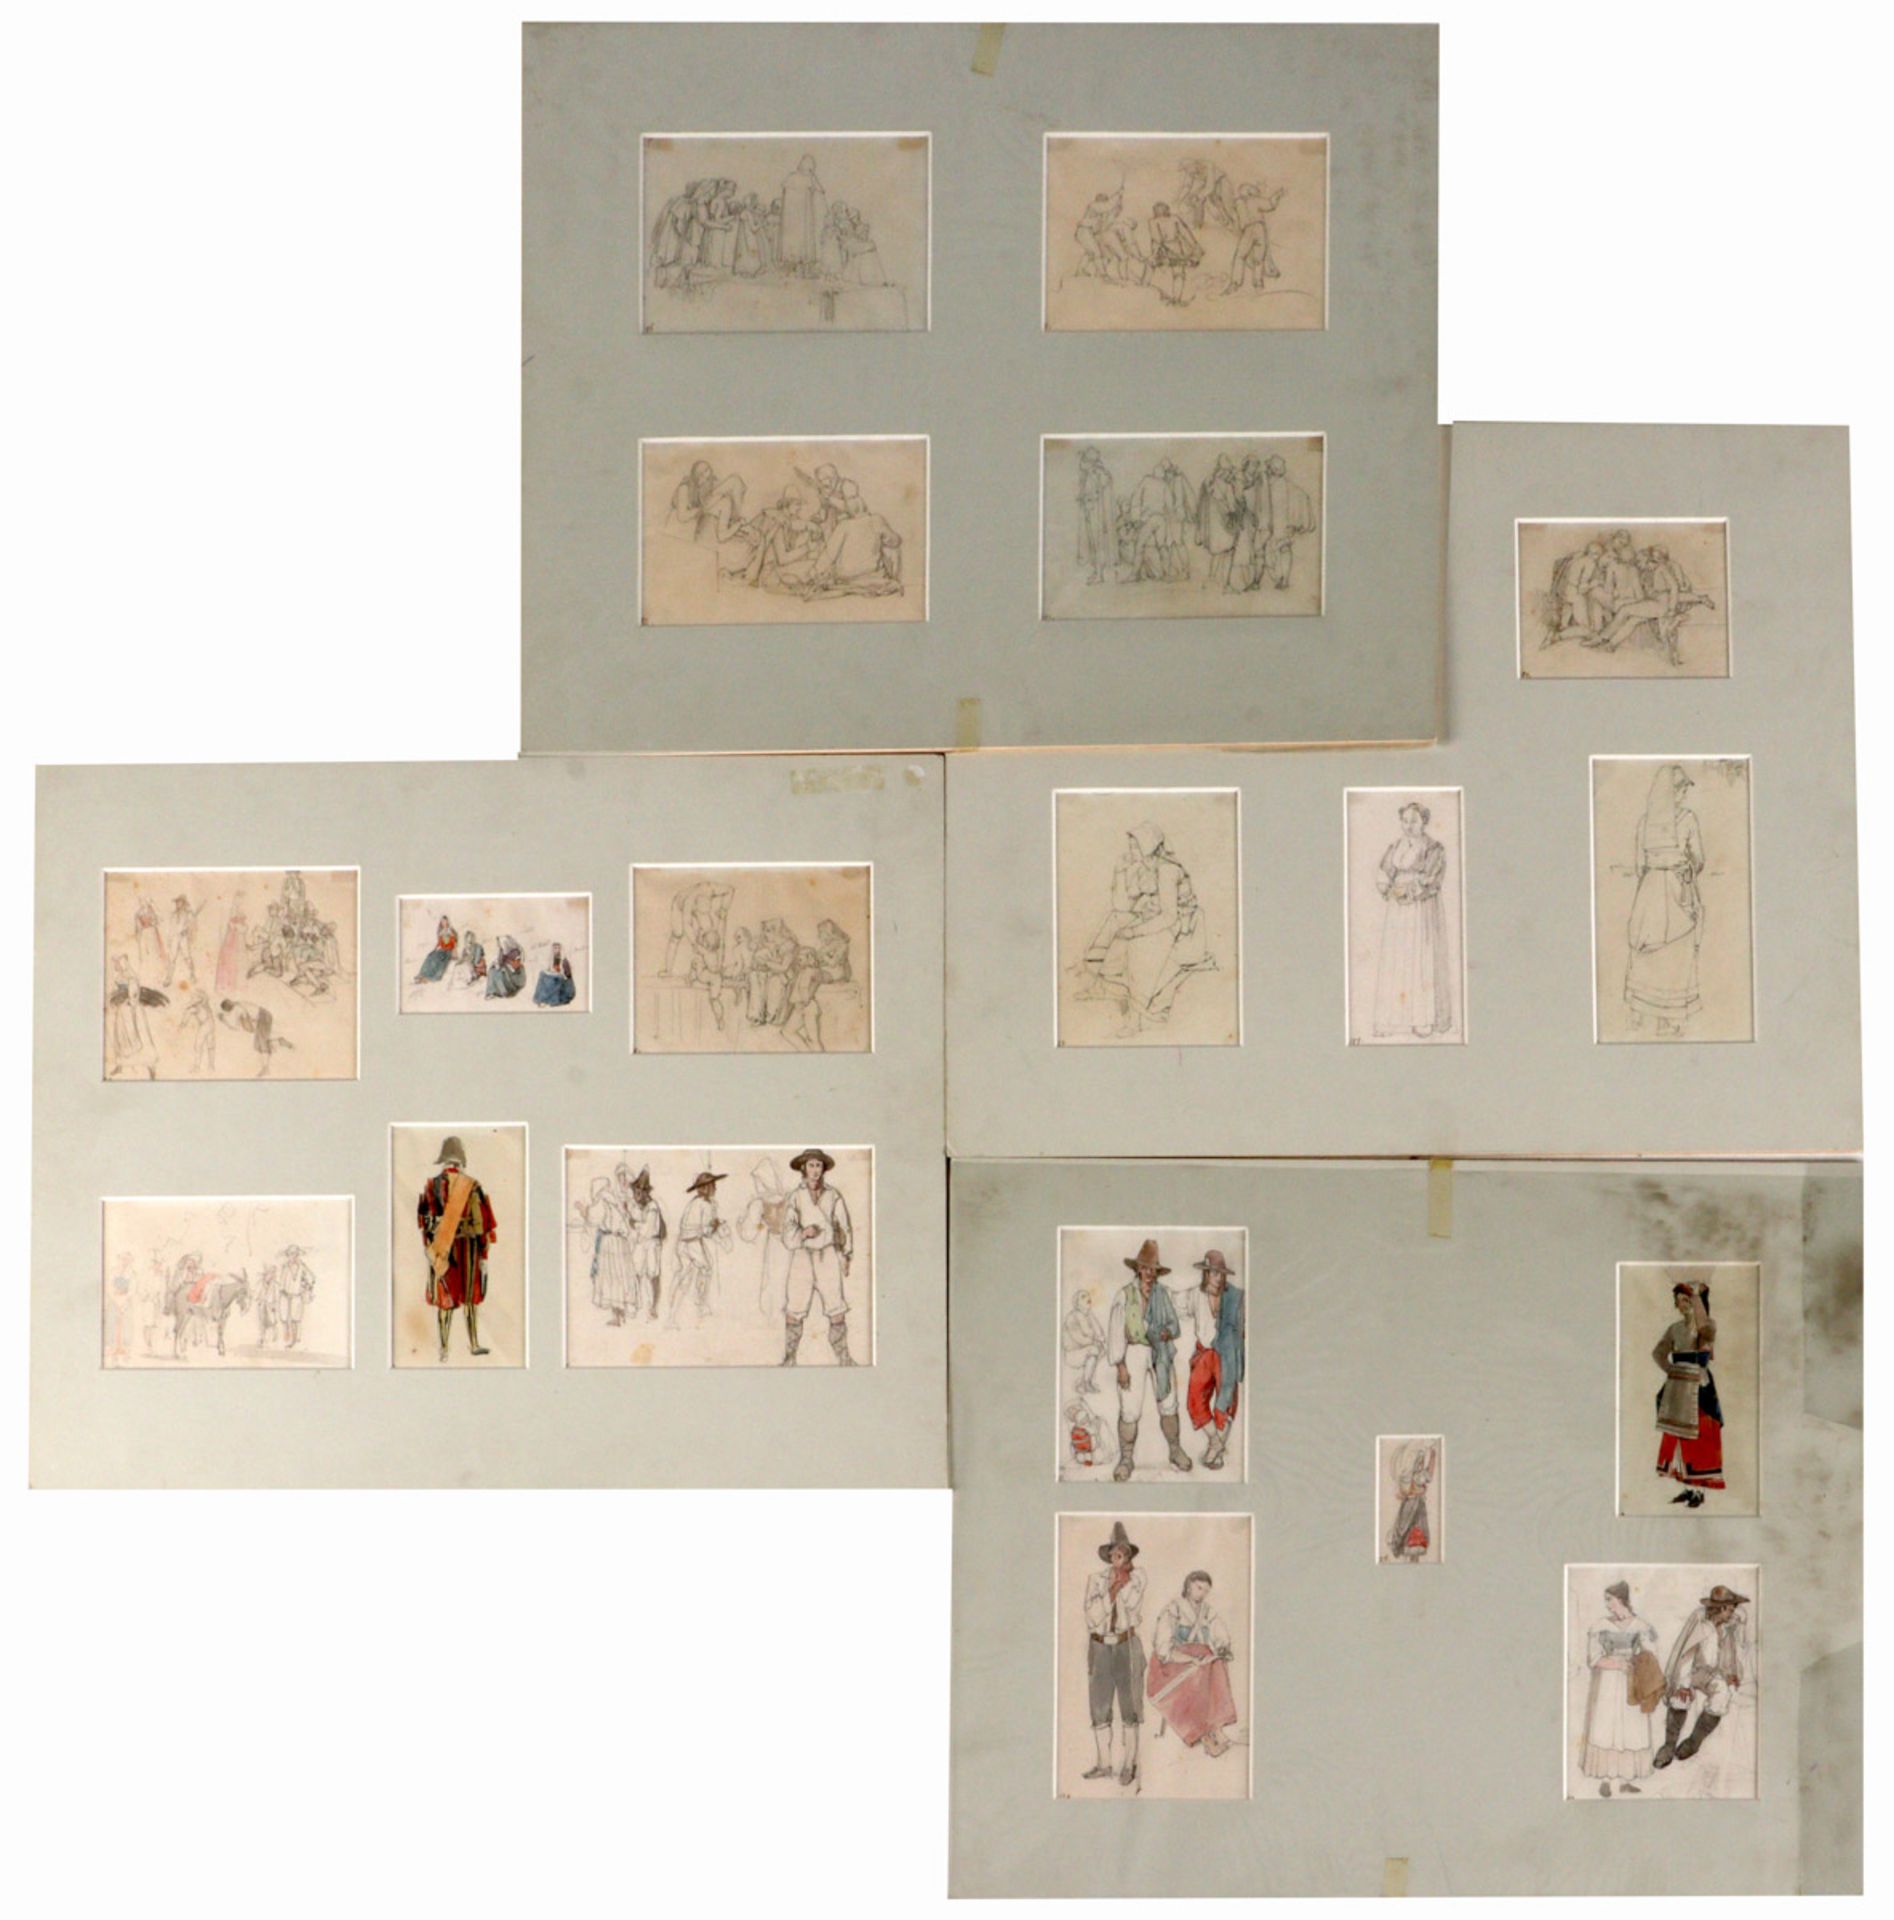 ALBRECHT ADAM (1786-1862), 19 STUDIES 19 drawings, 8 pencil and 11 watercolor on paper, from a